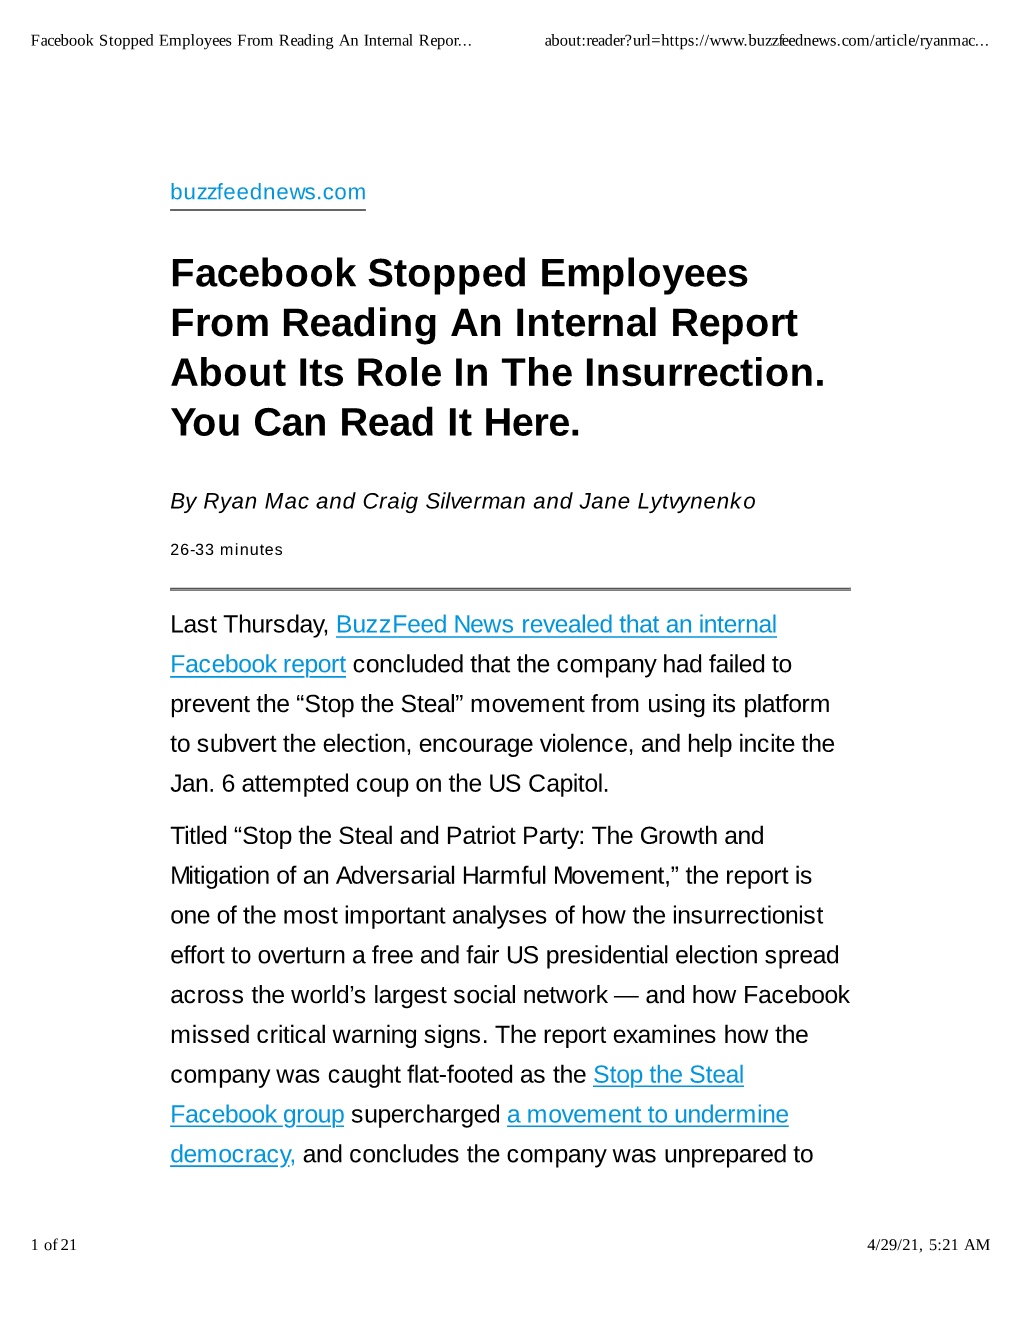 Facebook Stopped Employees from Reading an Internal Report About Its Role in the Insurrection